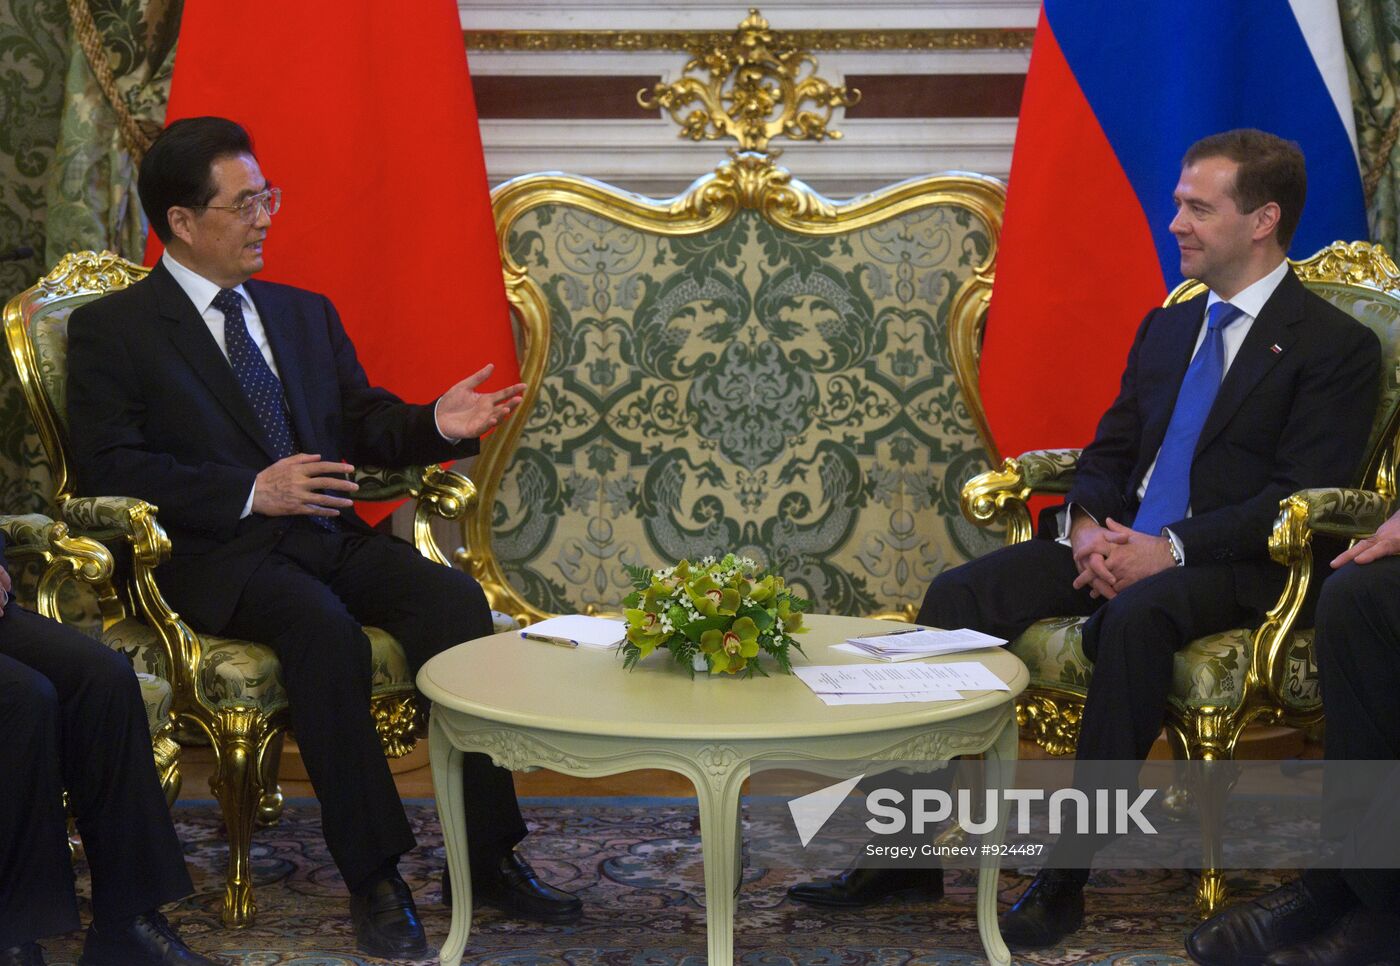 Hu Jintao's state visit to Russia